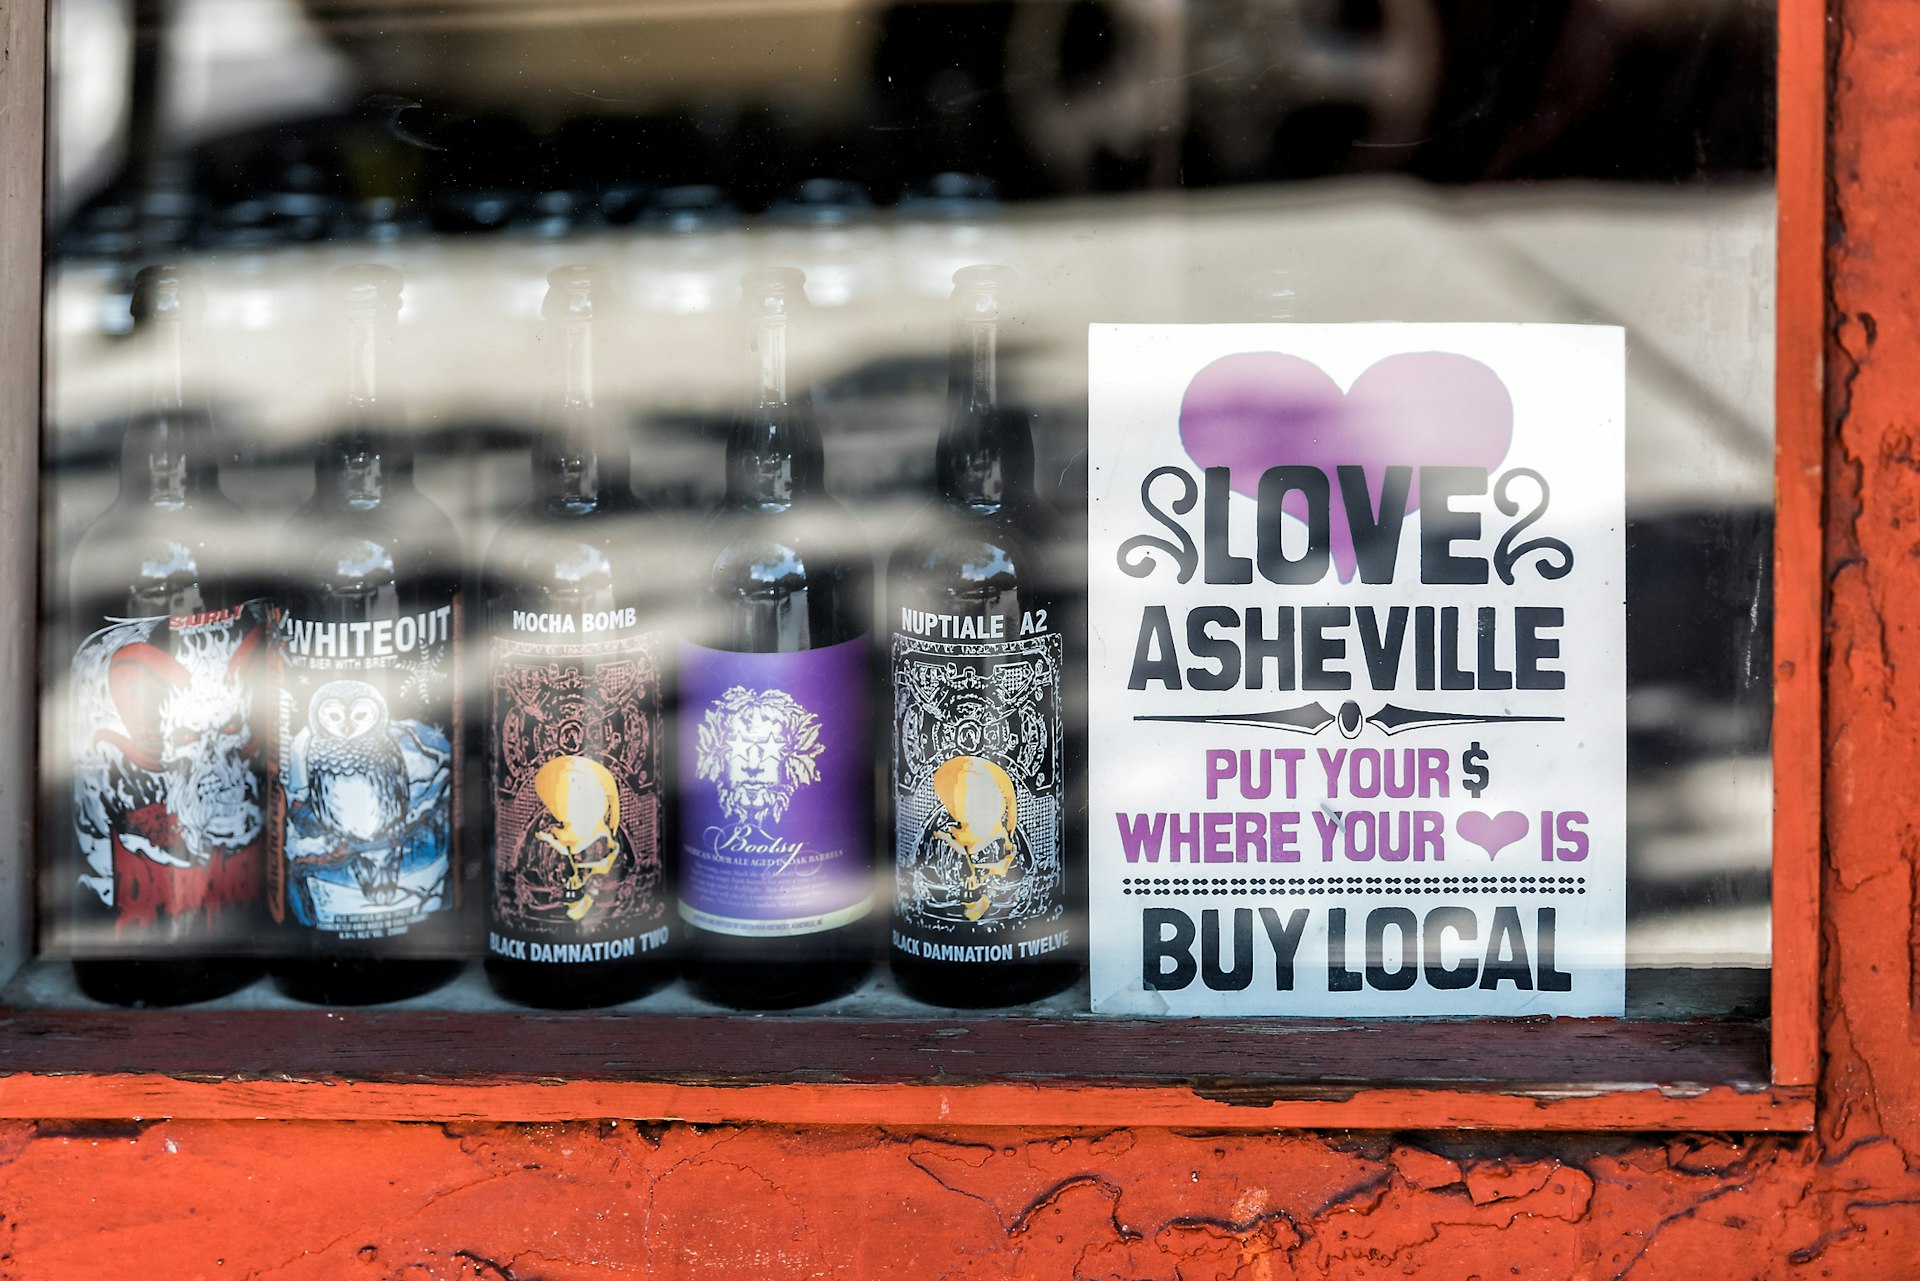 A window display of local beer bottles with a sign encouraging people to buy locally